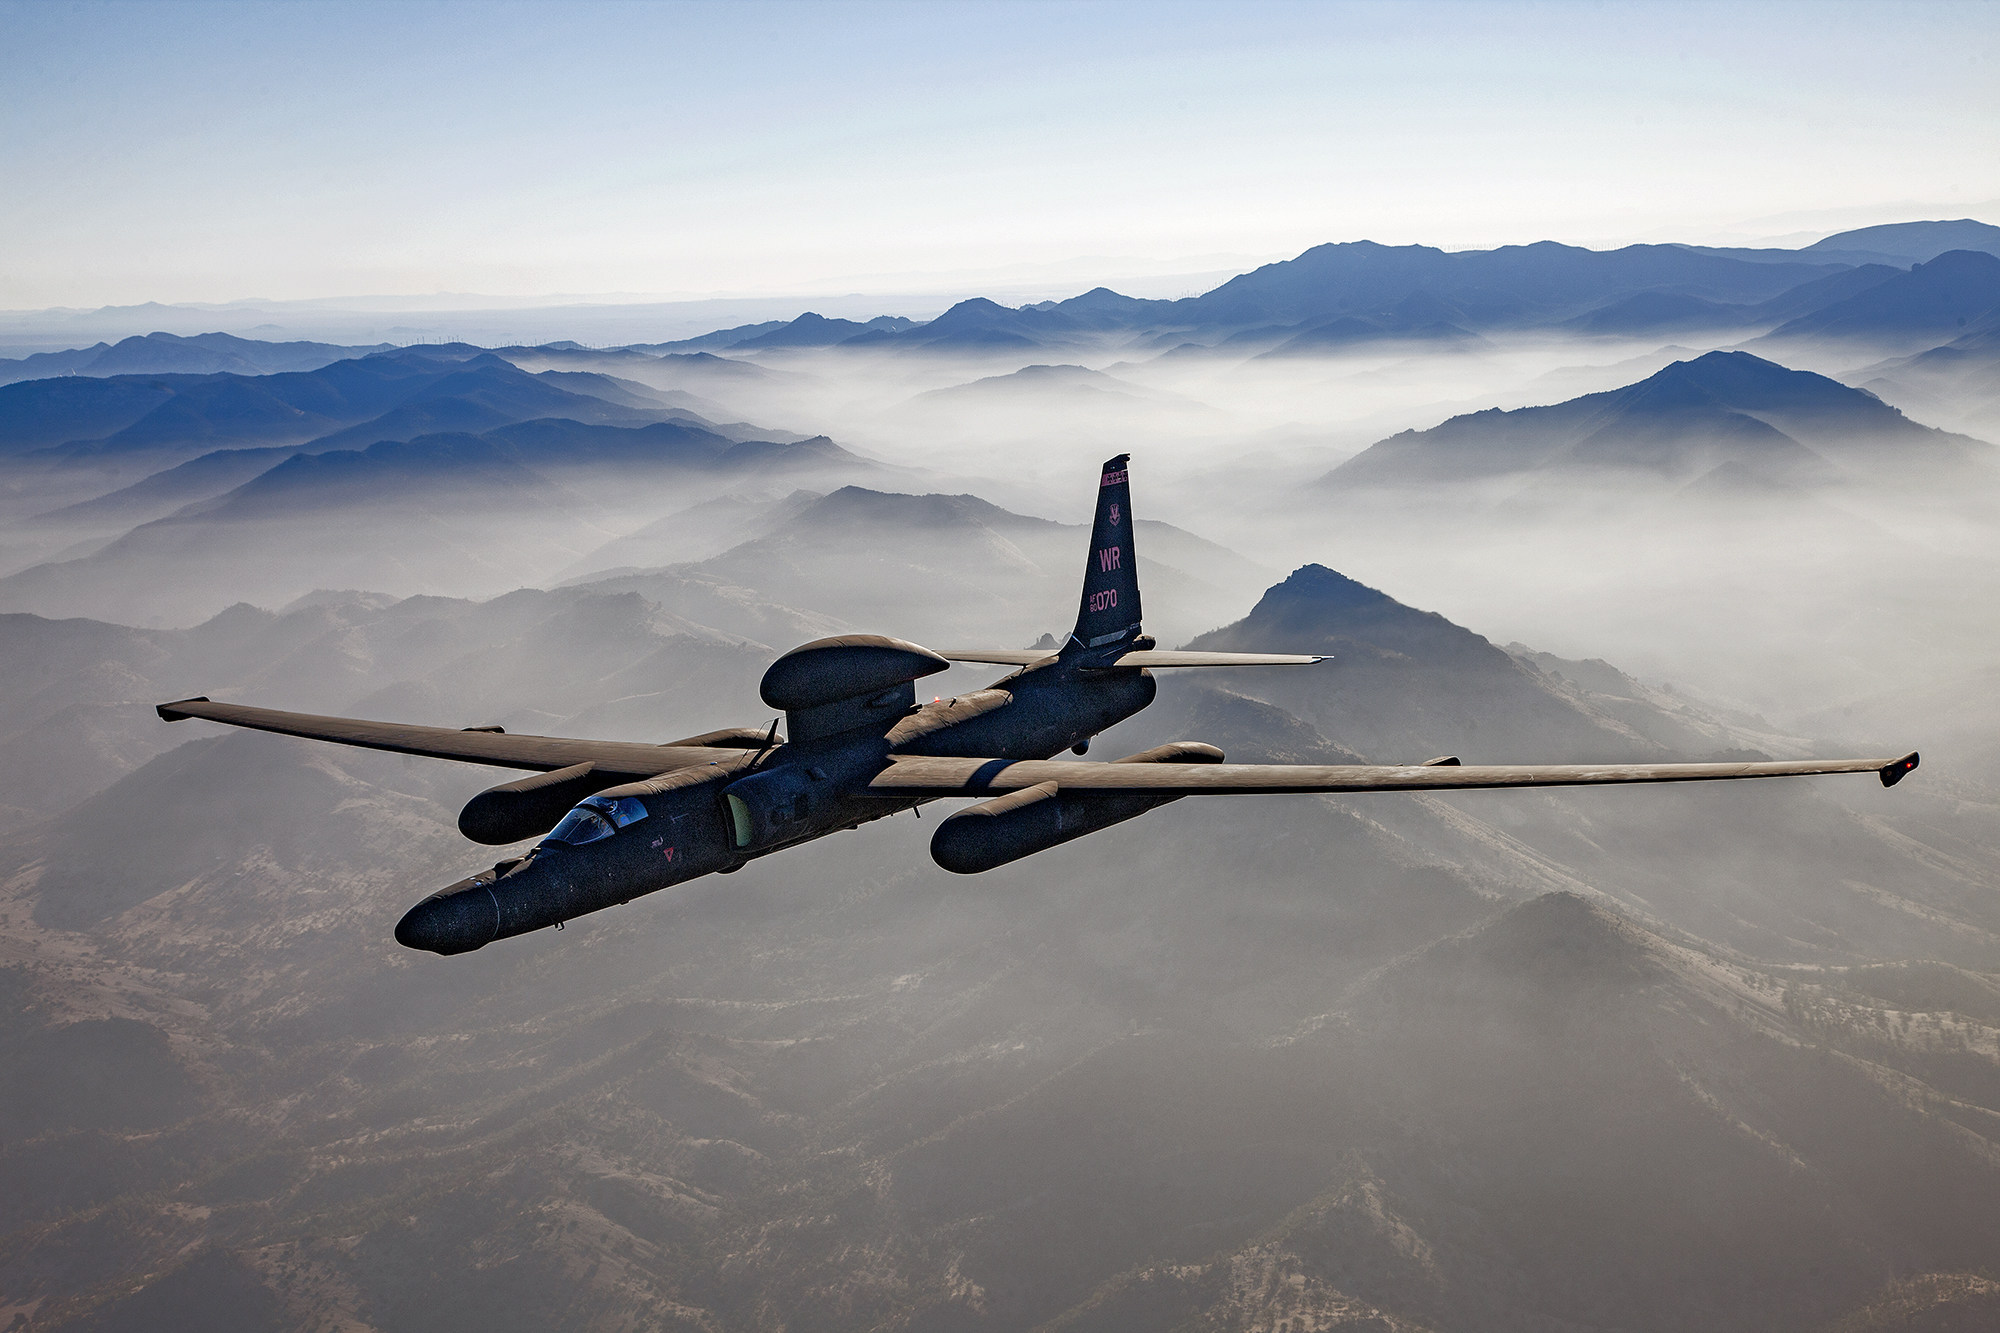 Recent flight testing by the U.S. Air Force, Lockheed Martin and Collins Aerospace Systems completed the upgrade of the full U-2 Dragon Lady fleet with the premier electro-optical/infrared sensor capability.